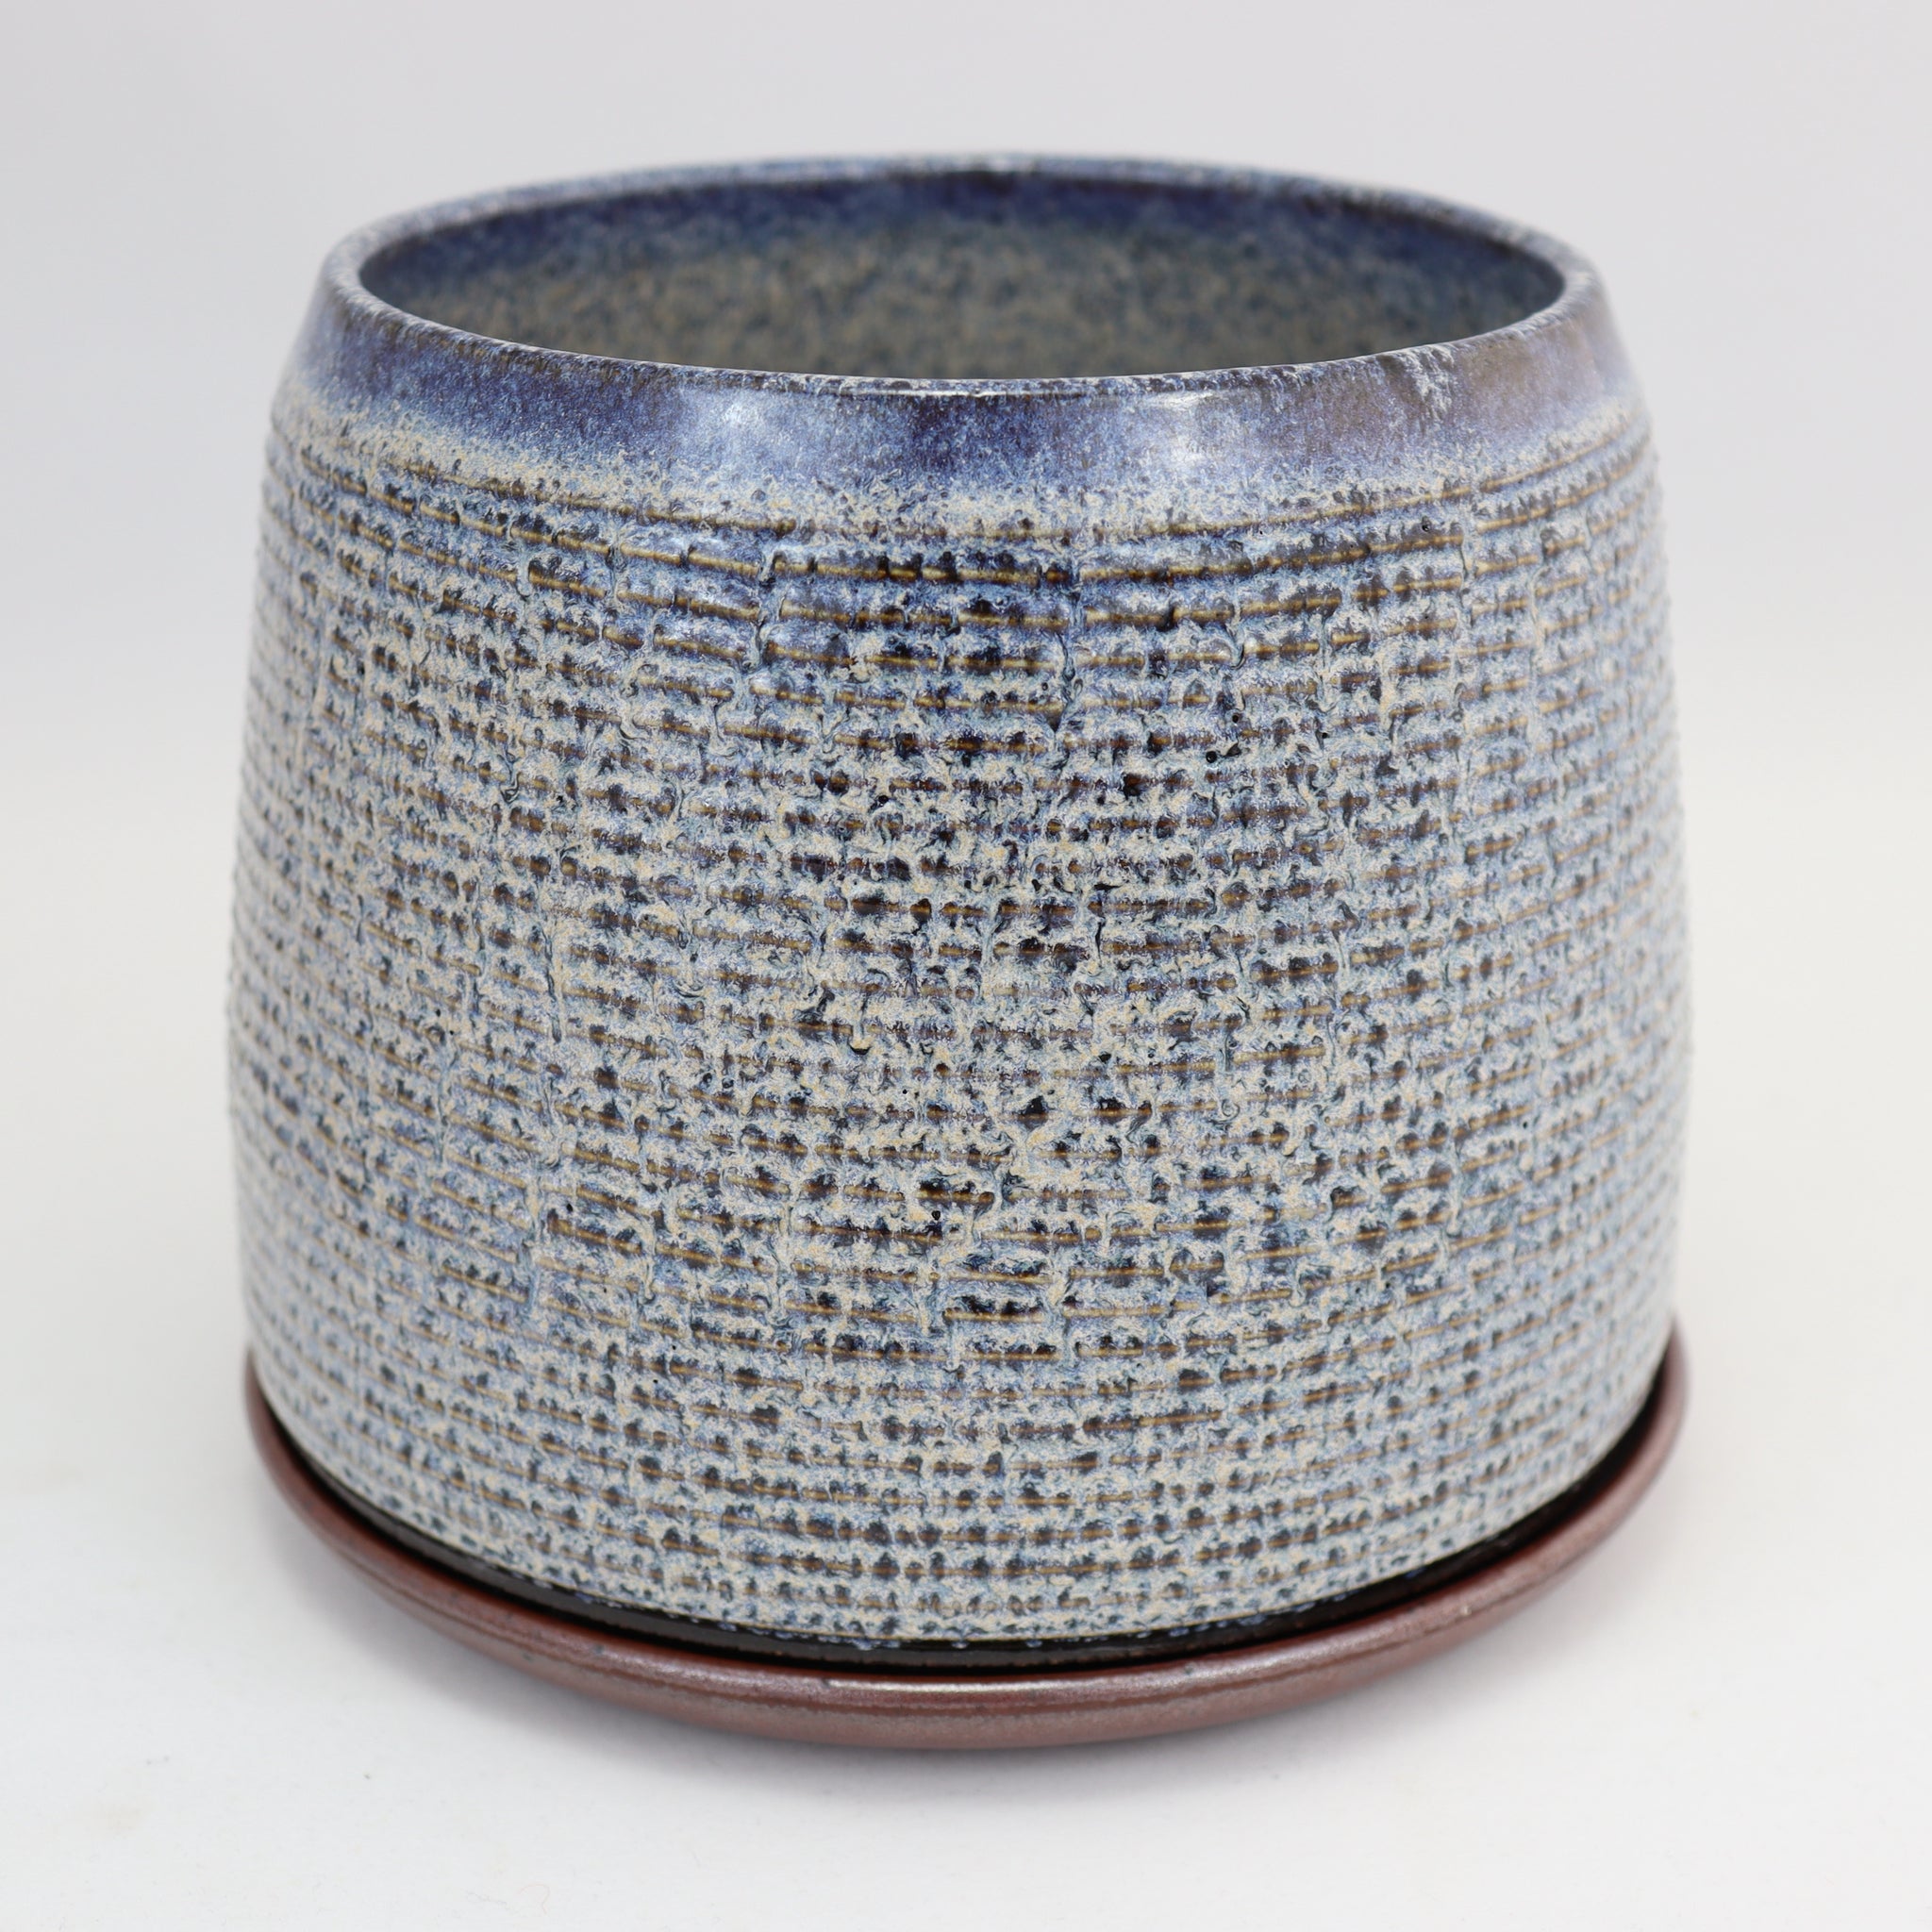 Textured Planter -  5.5 inches tall (14 cm)